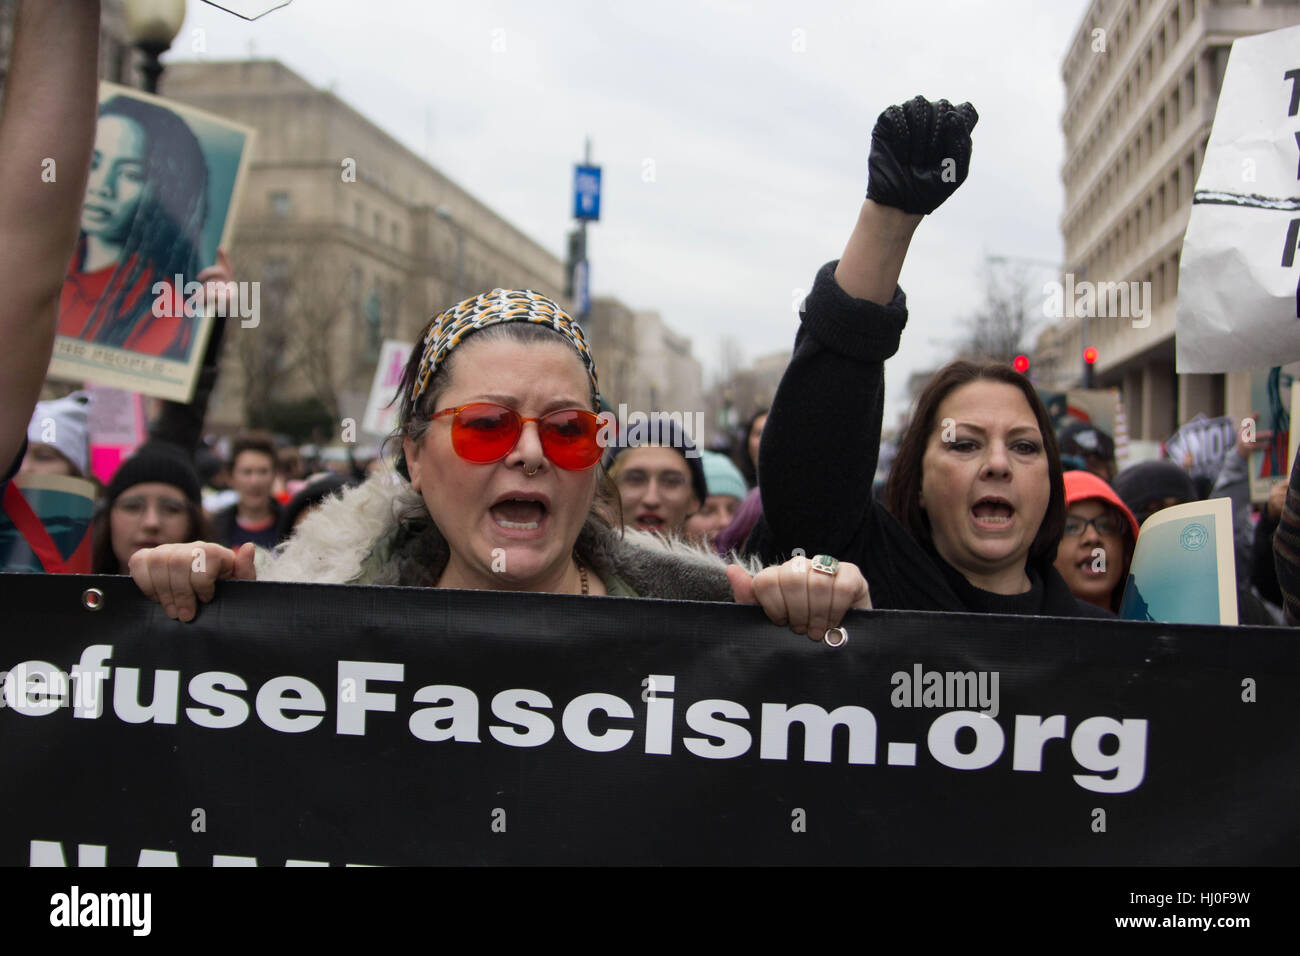 Washington DC, USA. 20th January, 2017. Protestors march voicing concerns about newly inaugurated President Donald Trump on the streets of Washington, DC, Friday, January 20, 2017. Credit: Michael Candelori/Alamy Live News Stock Photo